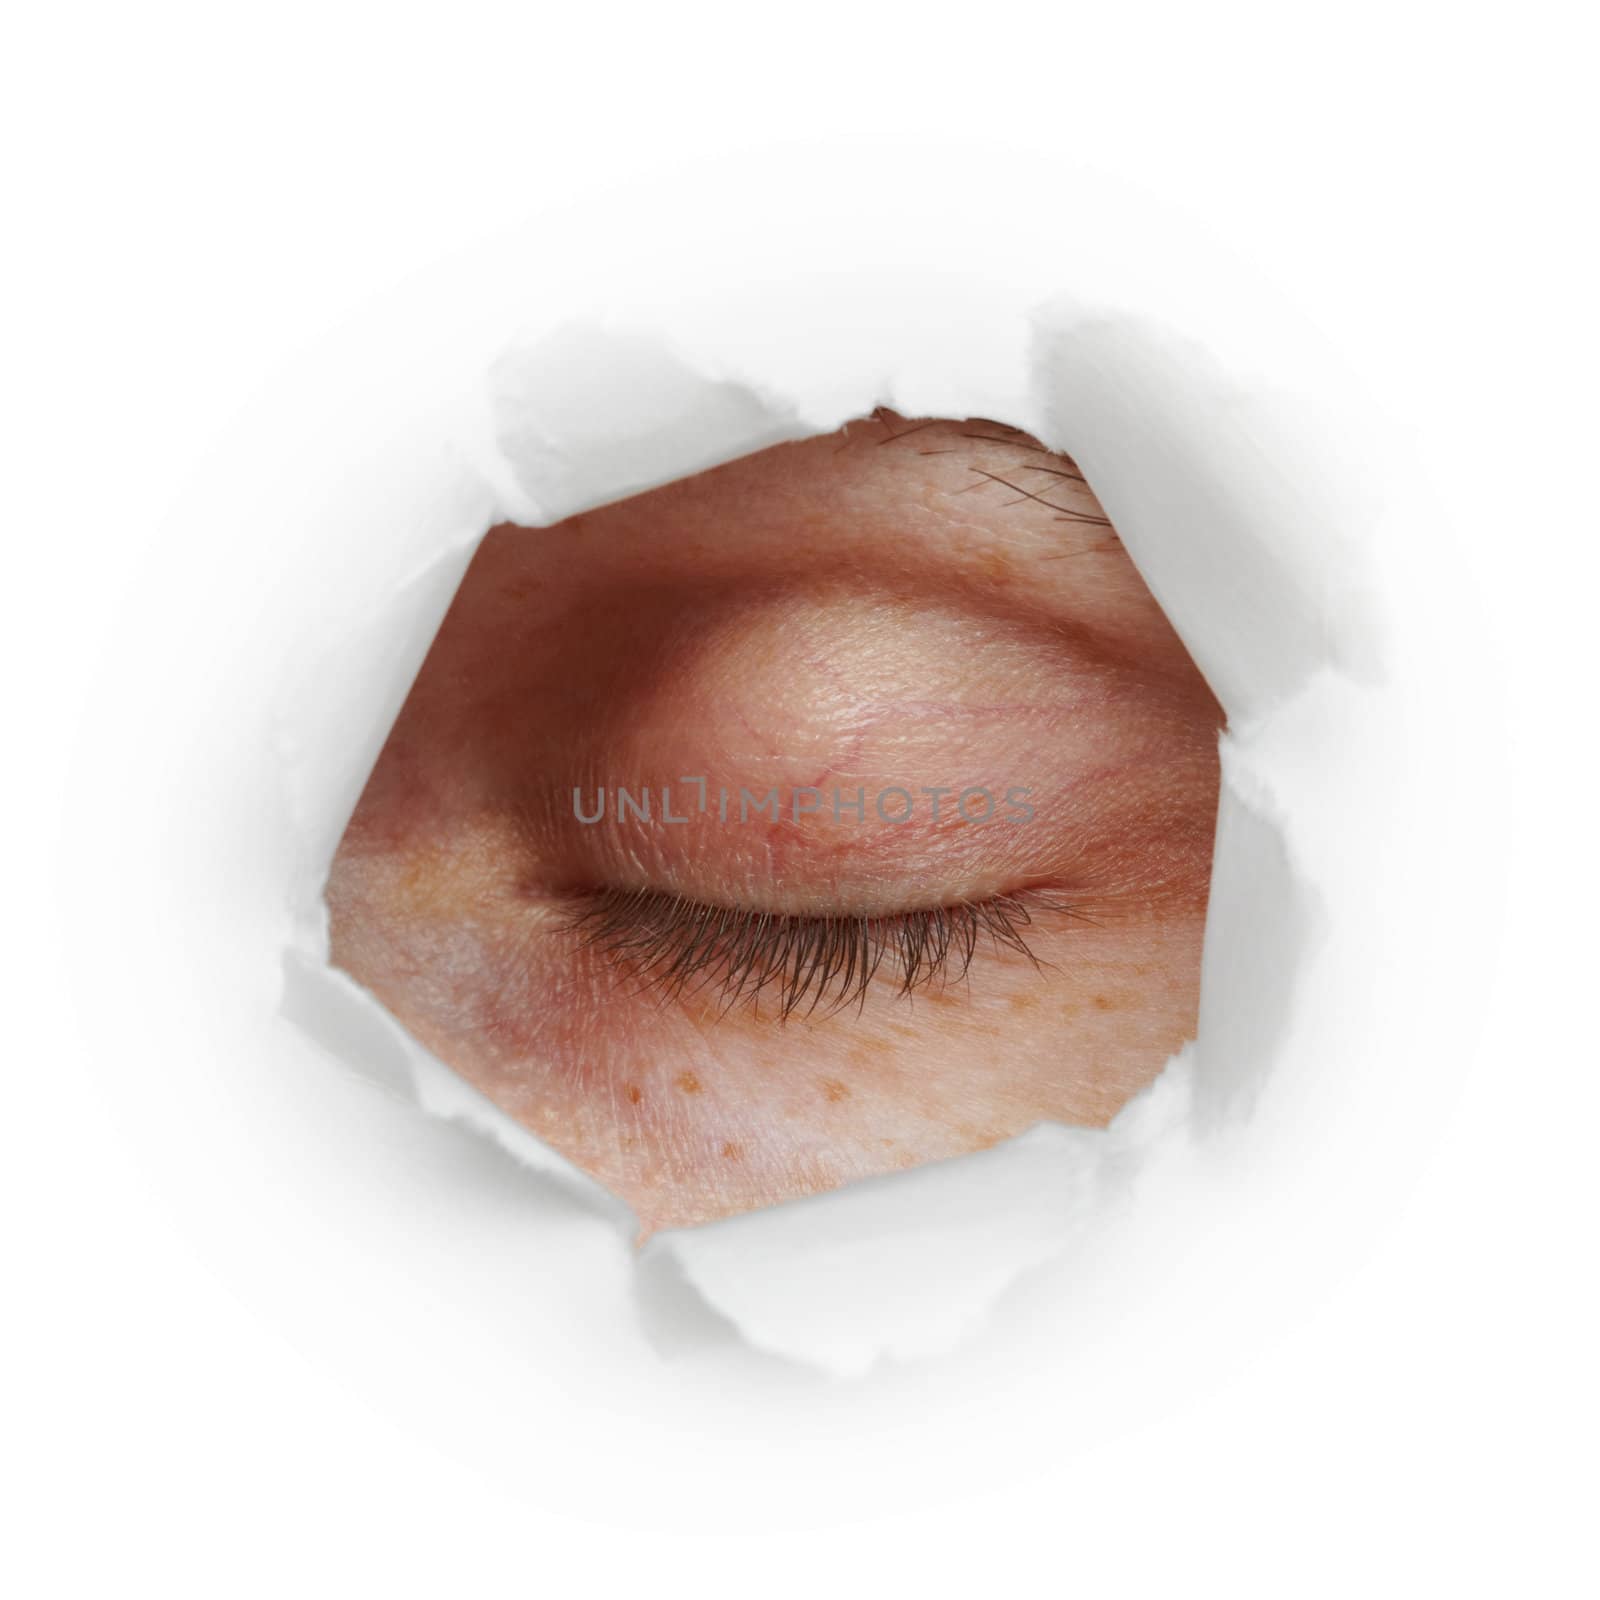 Closed human eye in a paper hole